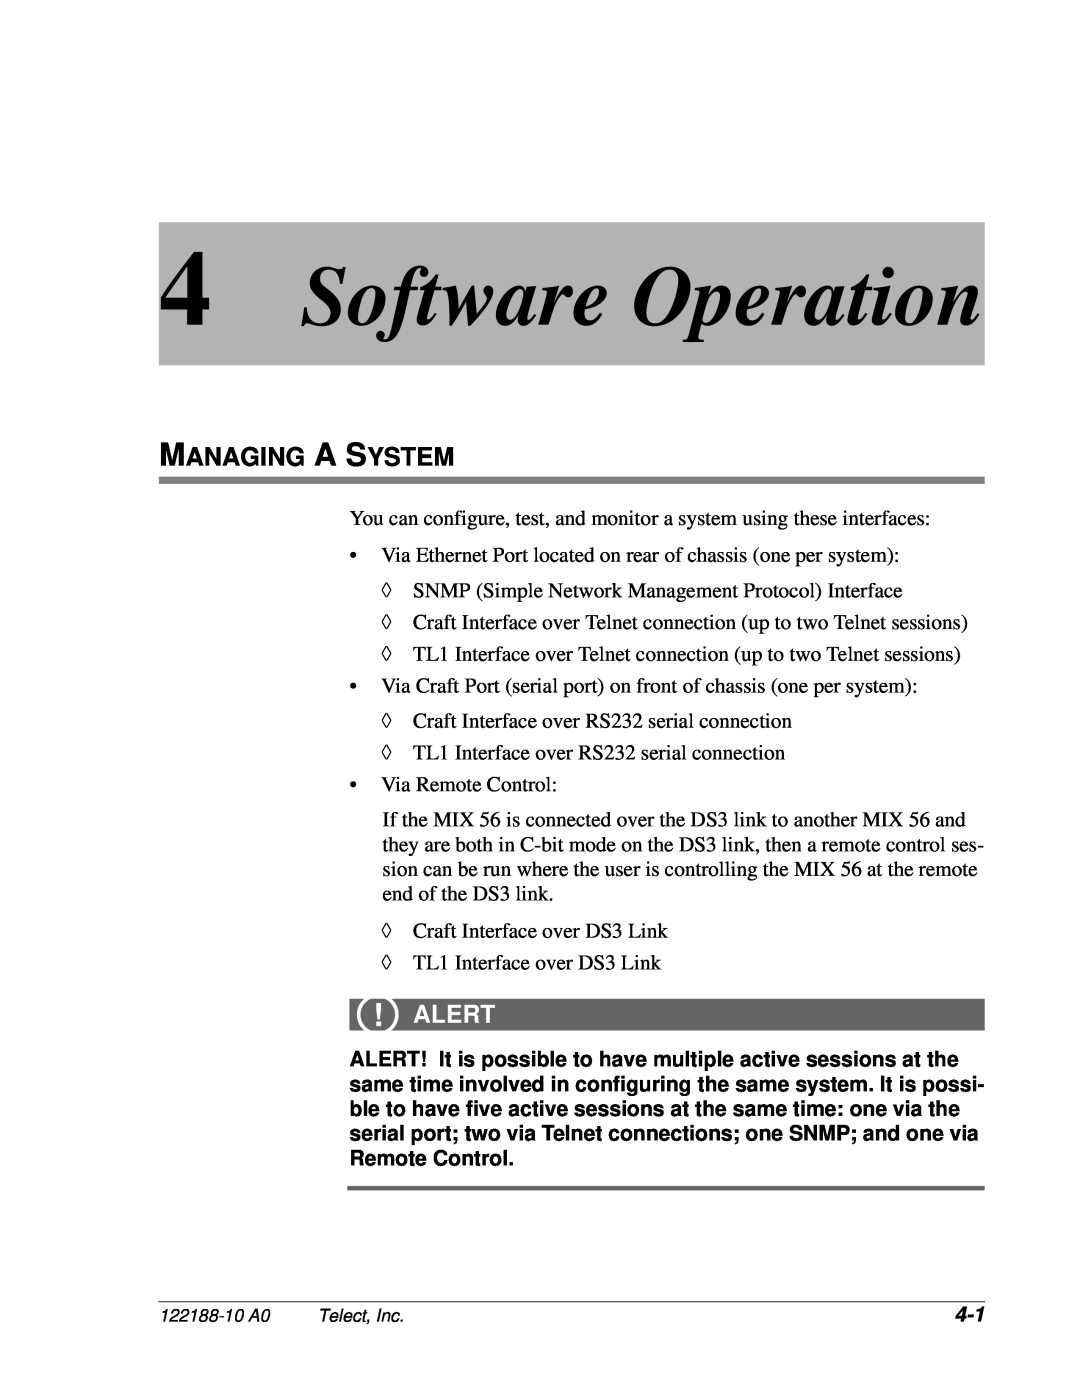 Telect MIX 56 user manual Software Operation, Managing A System, Alert 